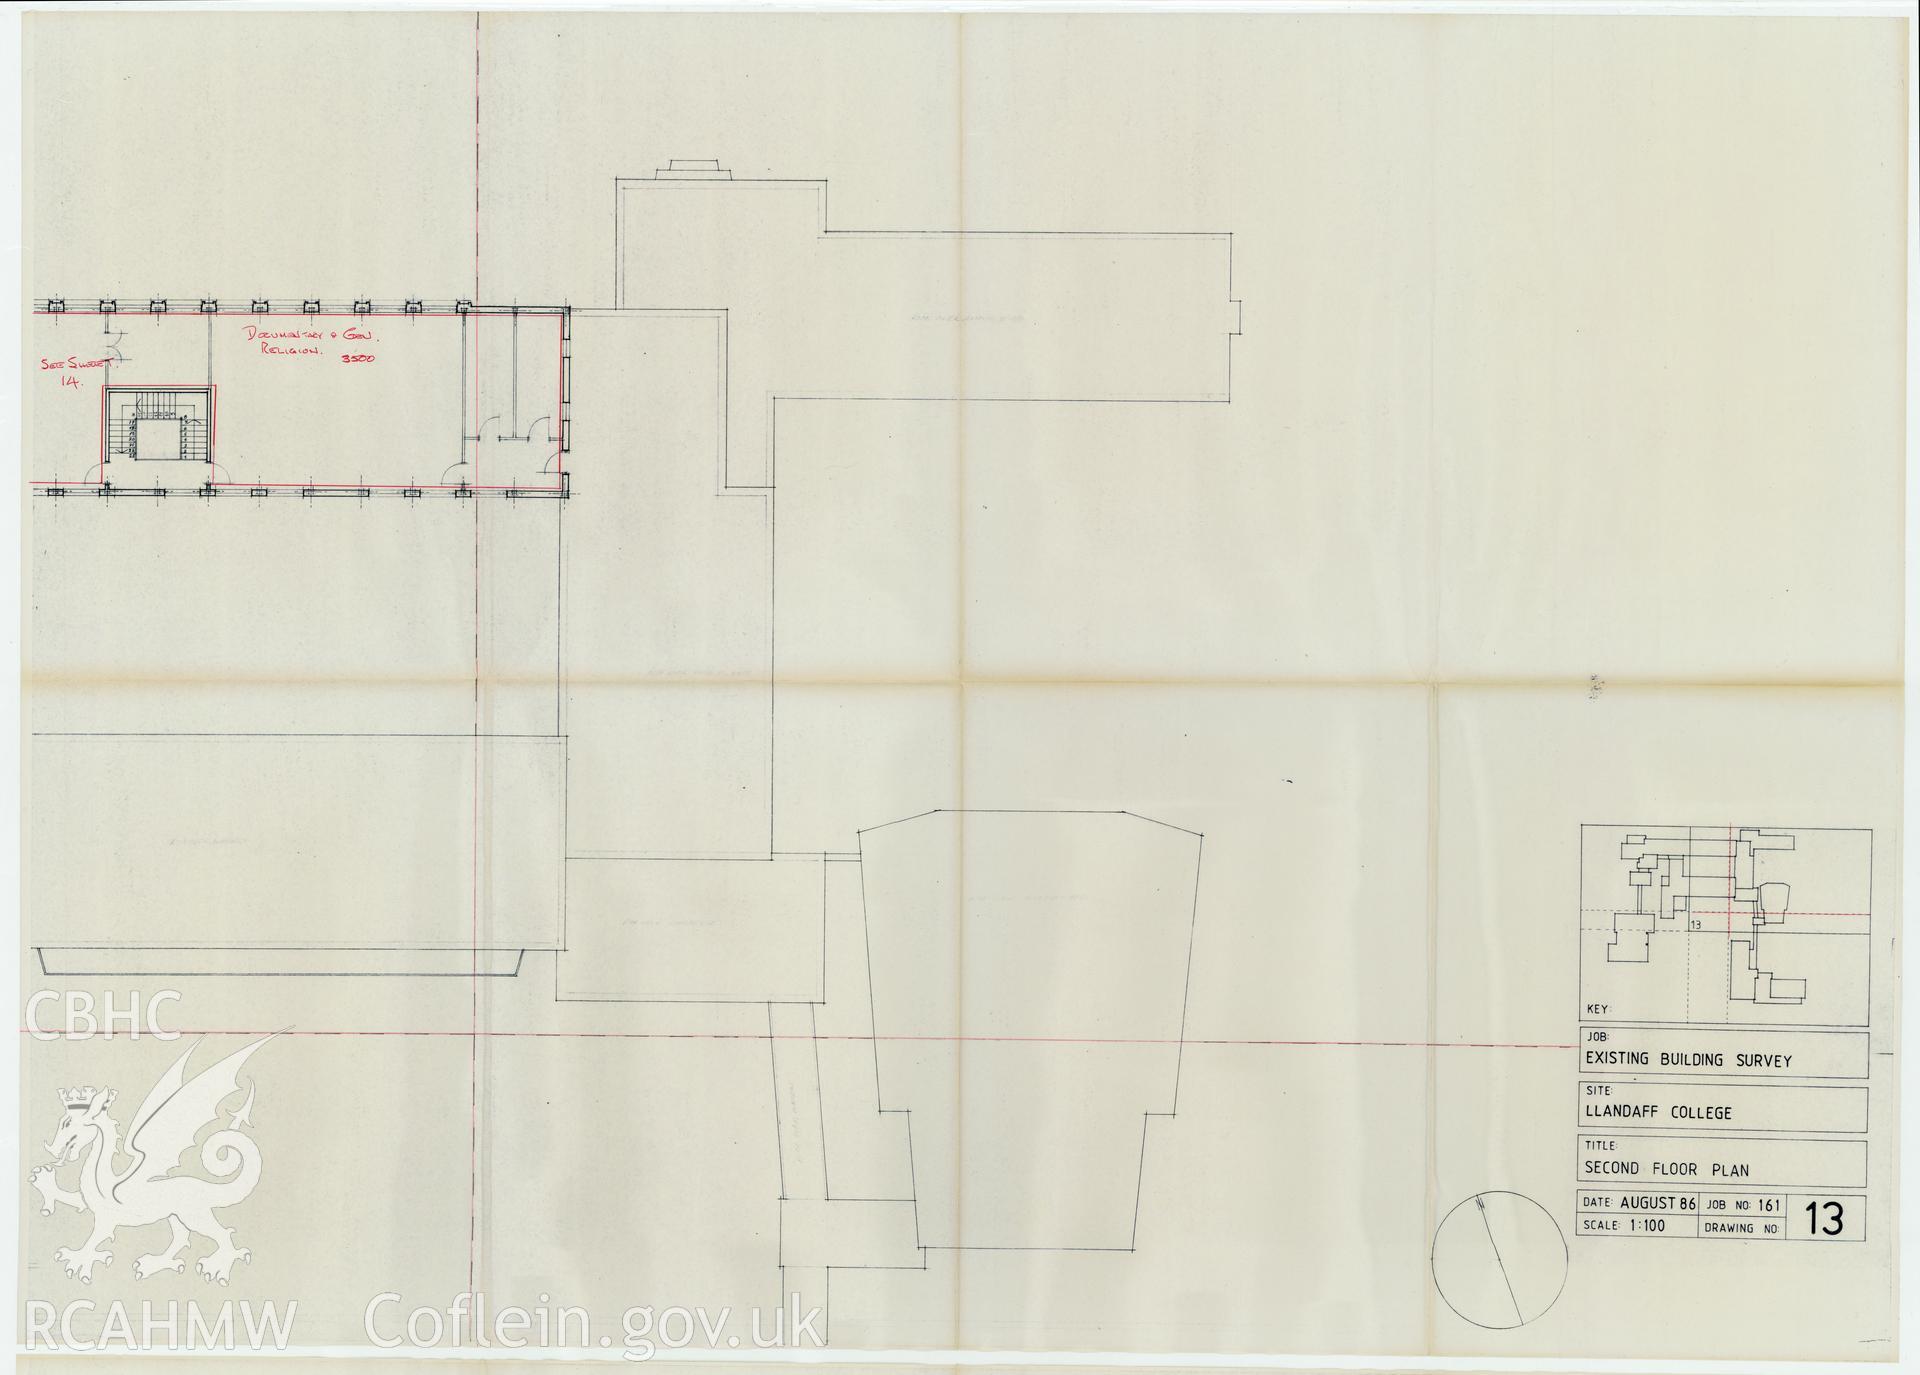 Plan of the second floor of Llandaff College, Cardiff. The existing building survey, August 1986, No 13.